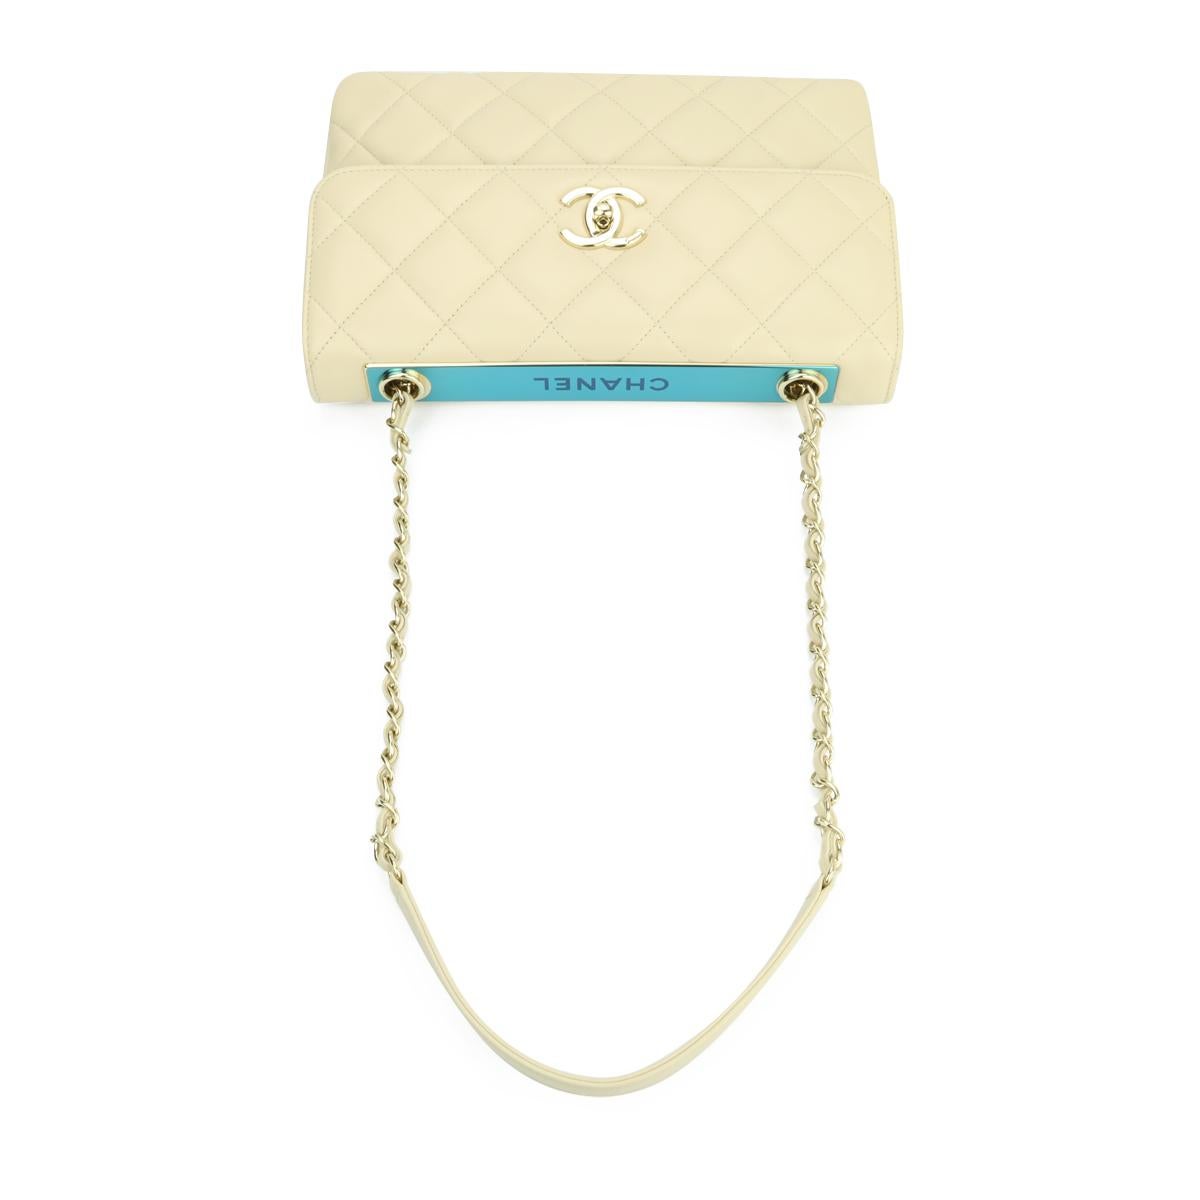 CHANEL Trendy CC Flap Bag Light Beige Lambskin with Gold Hardware 2015 5